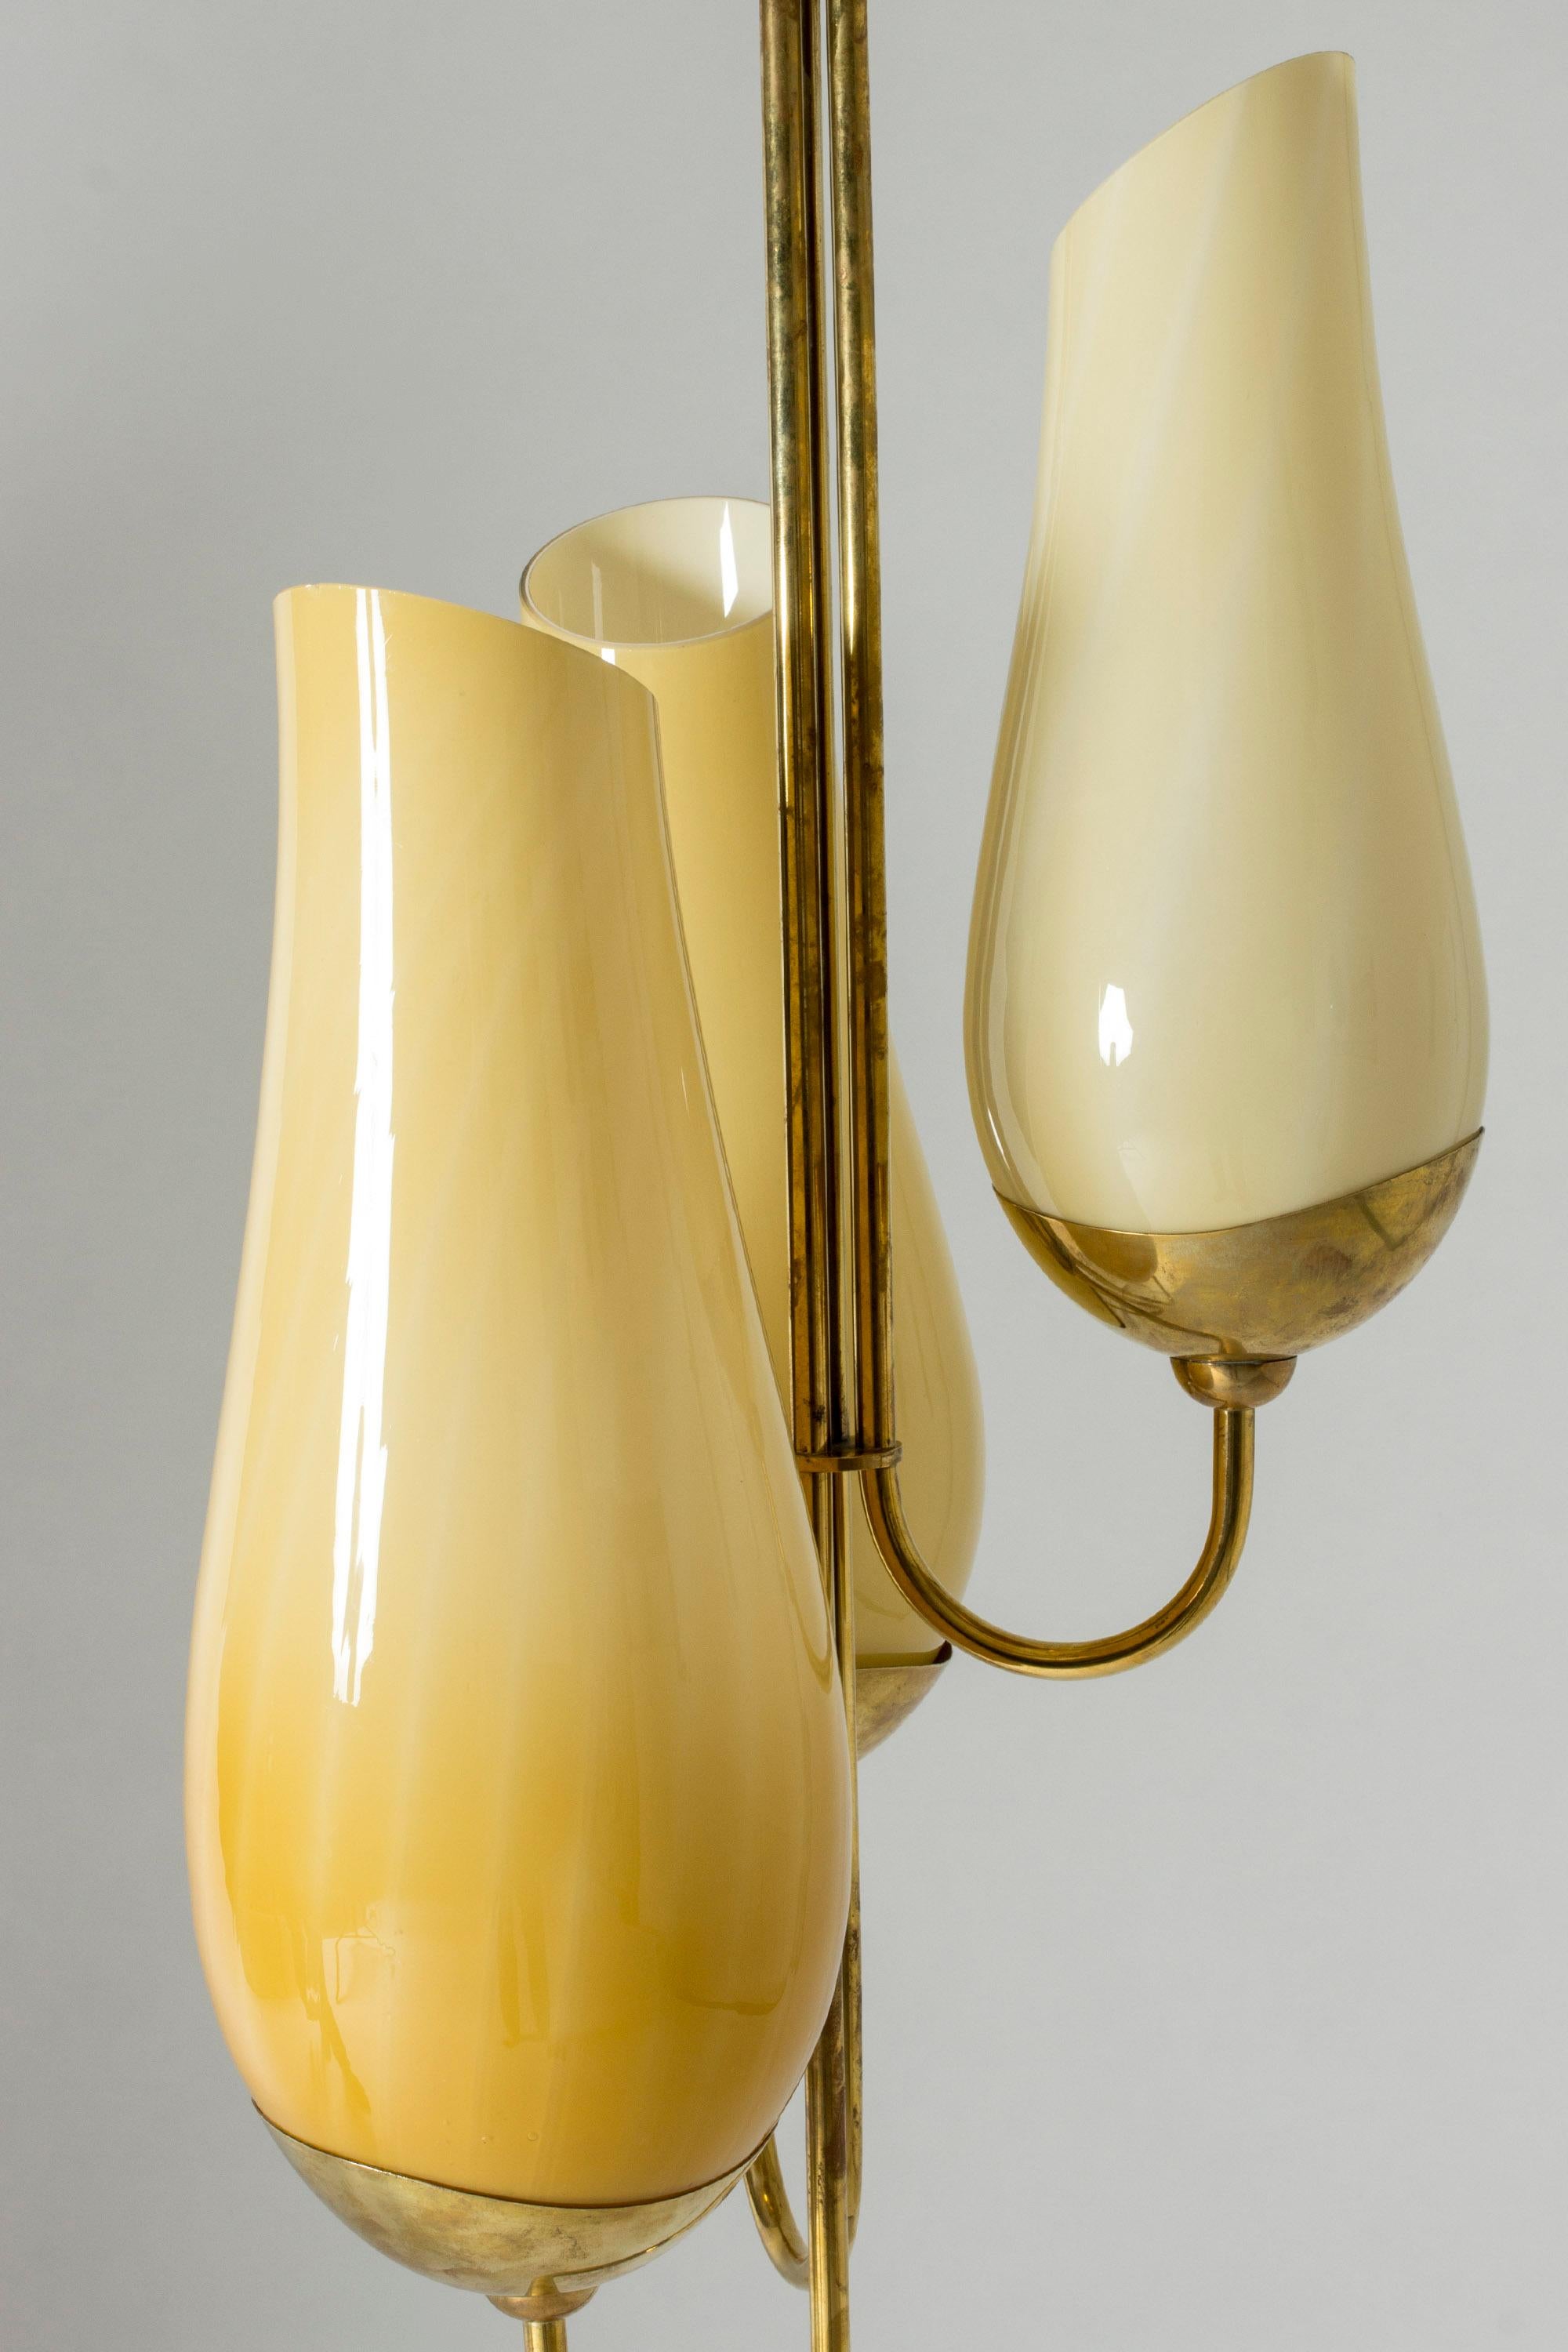 Brass and Glass Cgandelier by Paavo Tynell and Gunnel Nyman for Taito Oy, 1940s For Sale 1